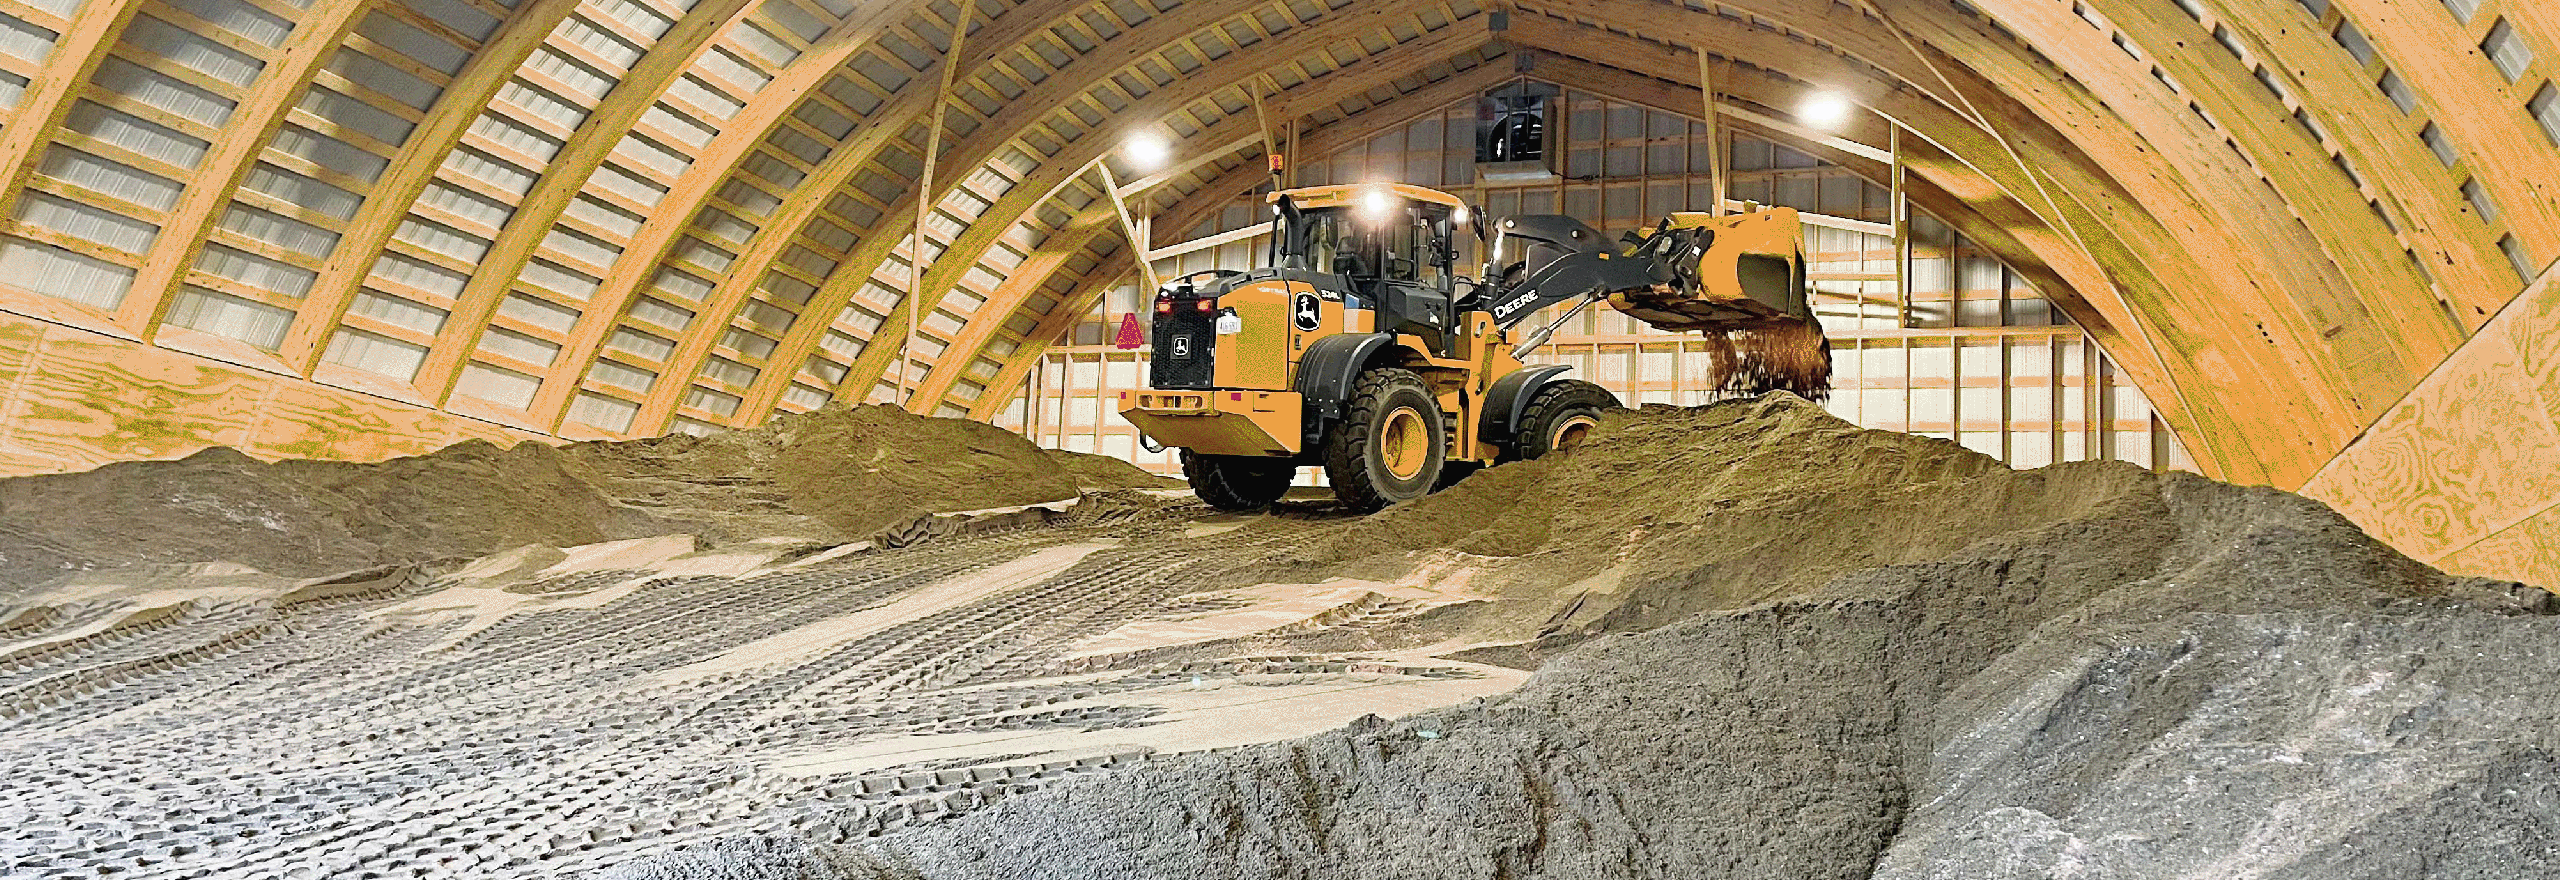 Sand/Salt Shed - Small Buildings, Large Maintenance Costs